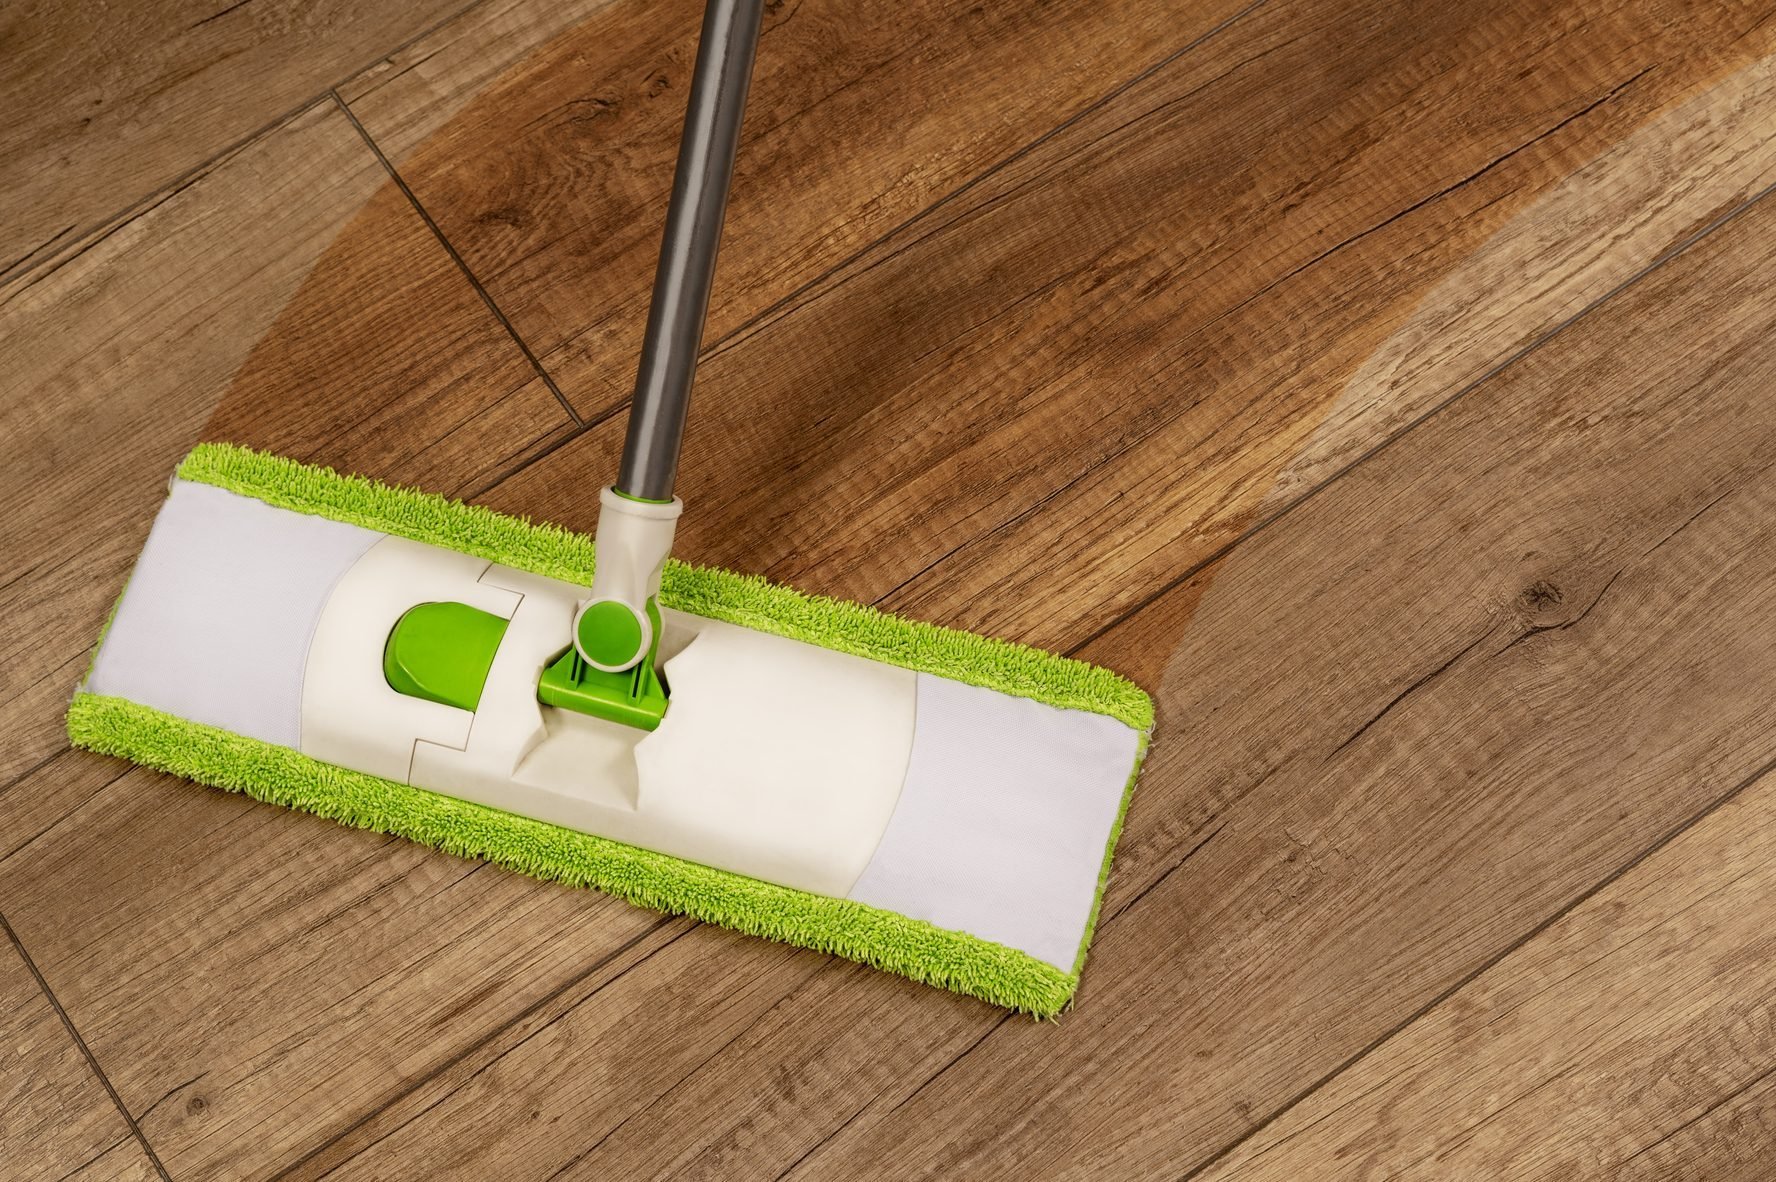 The Best Way To Clean Floors Of All